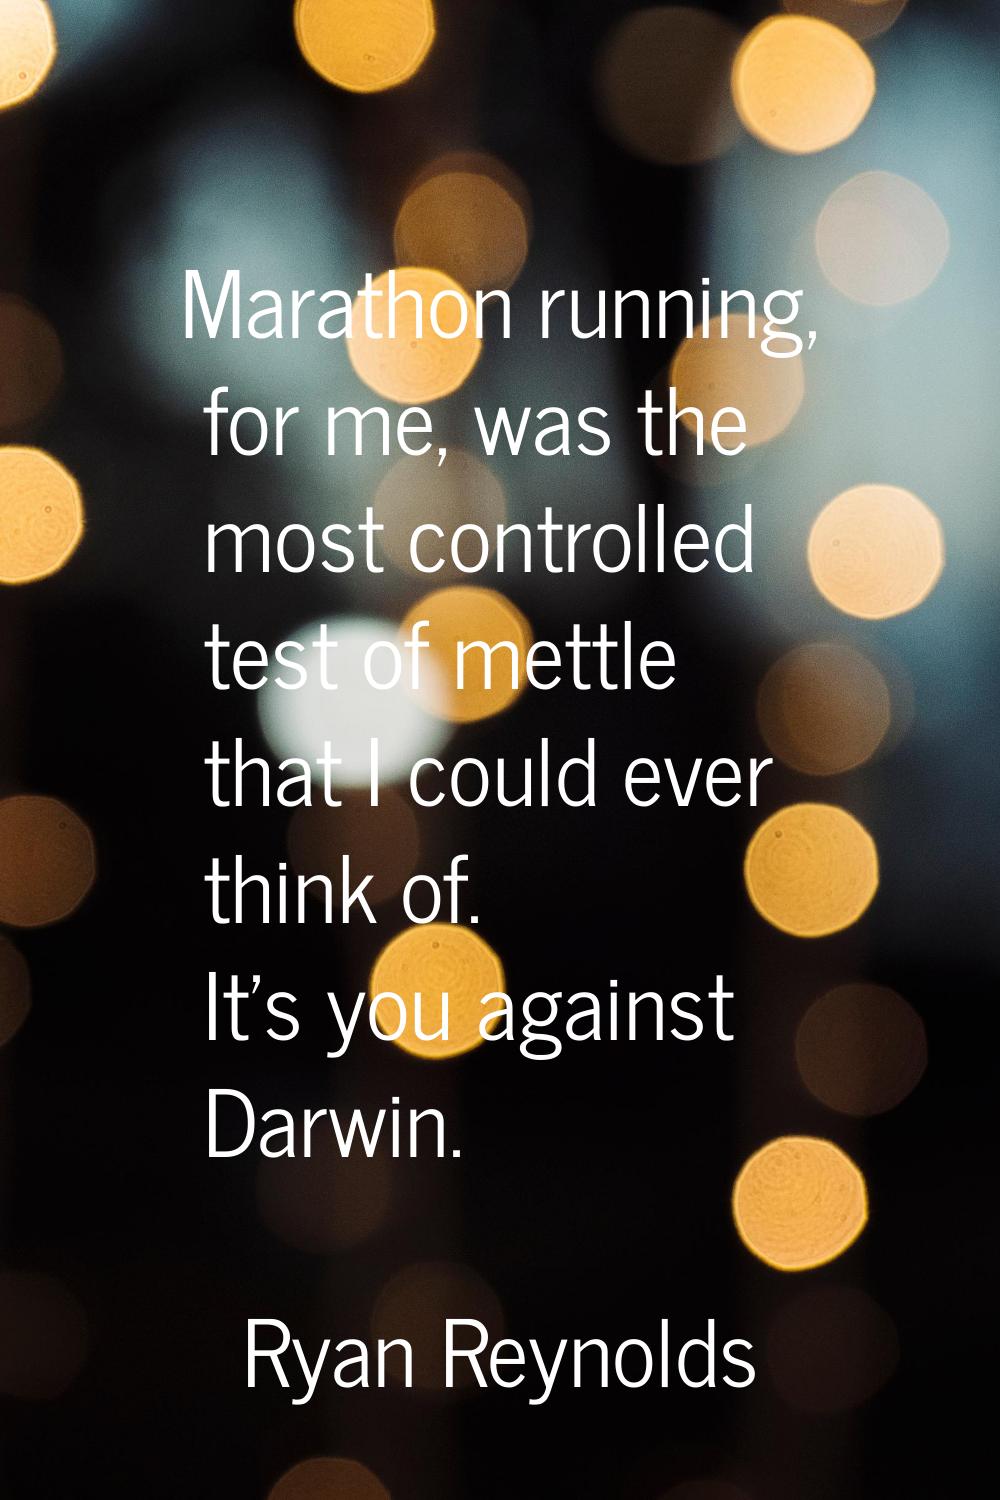 Marathon running, for me, was the most controlled test of mettle that I could ever think of. It's y